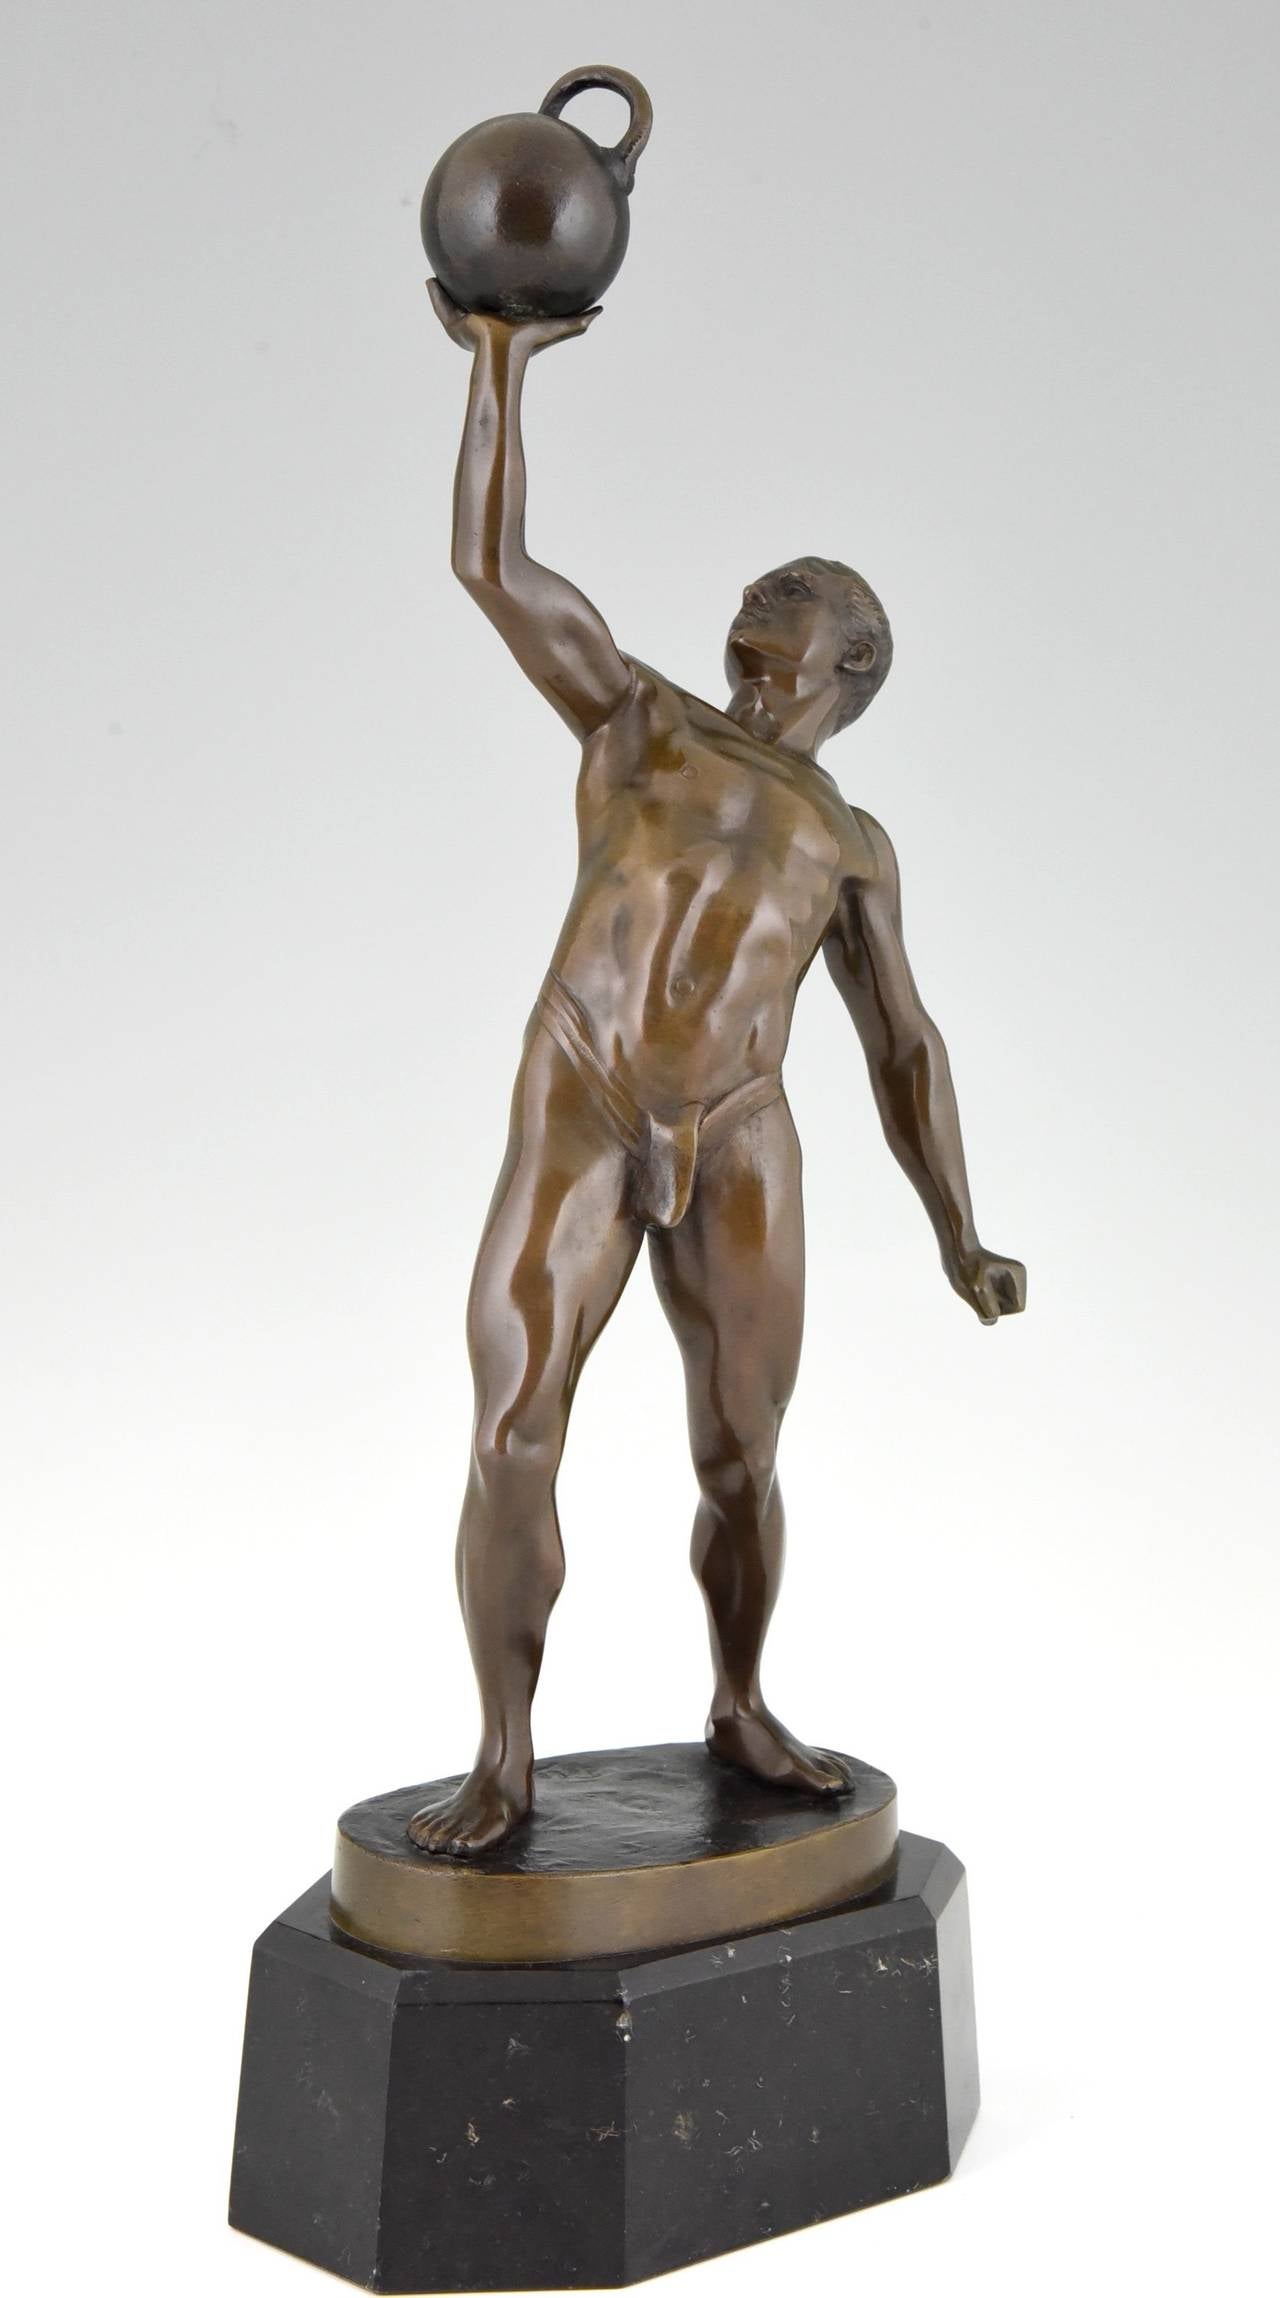 Patinated Antique Sculpture of a Male Nude Athlete with dumbbell by Peleschka 1900